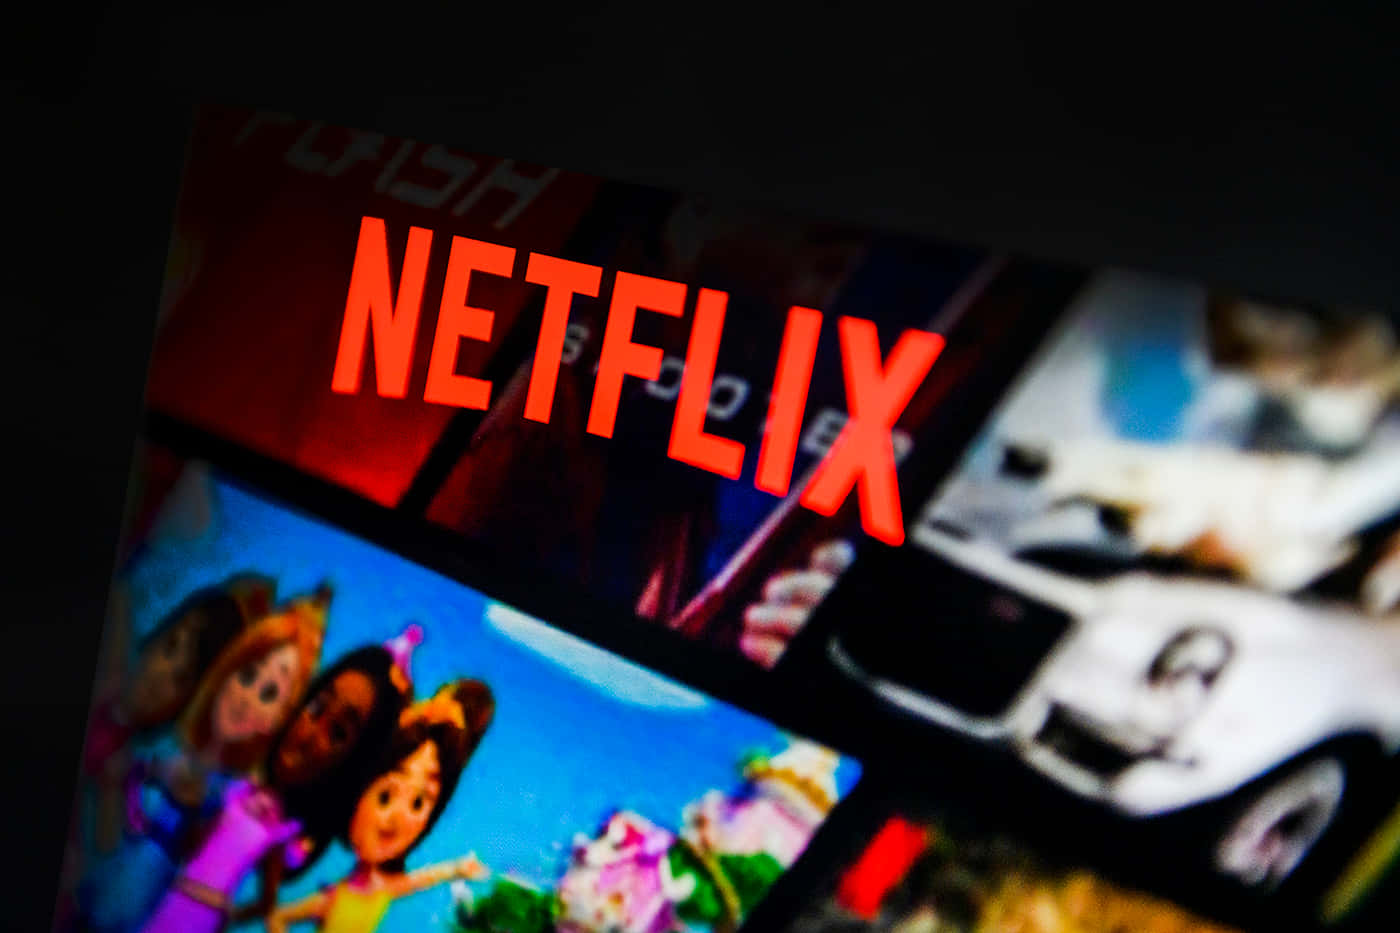 Stream your favorite shows on Netflix